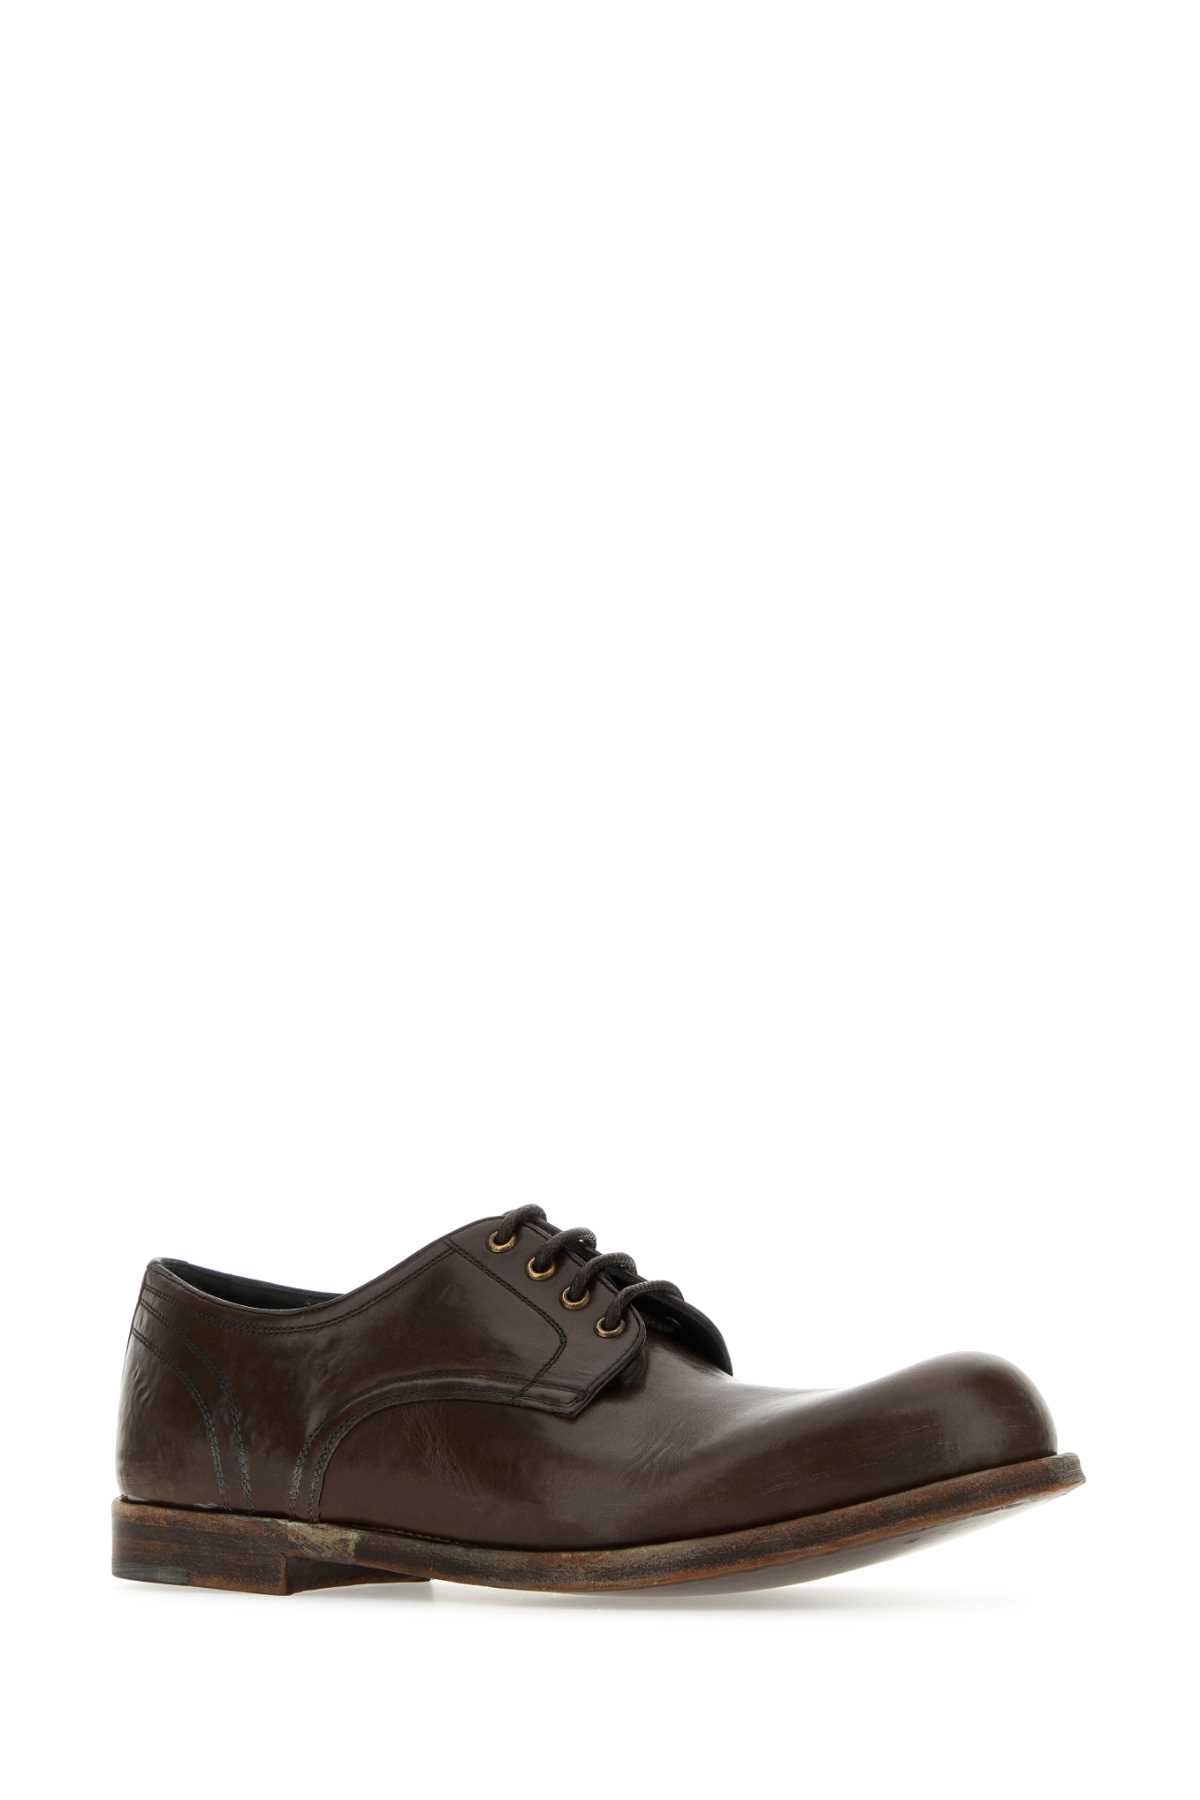 DOLCE & GABBANA BROWN LEATHER LACE-UP SHOES